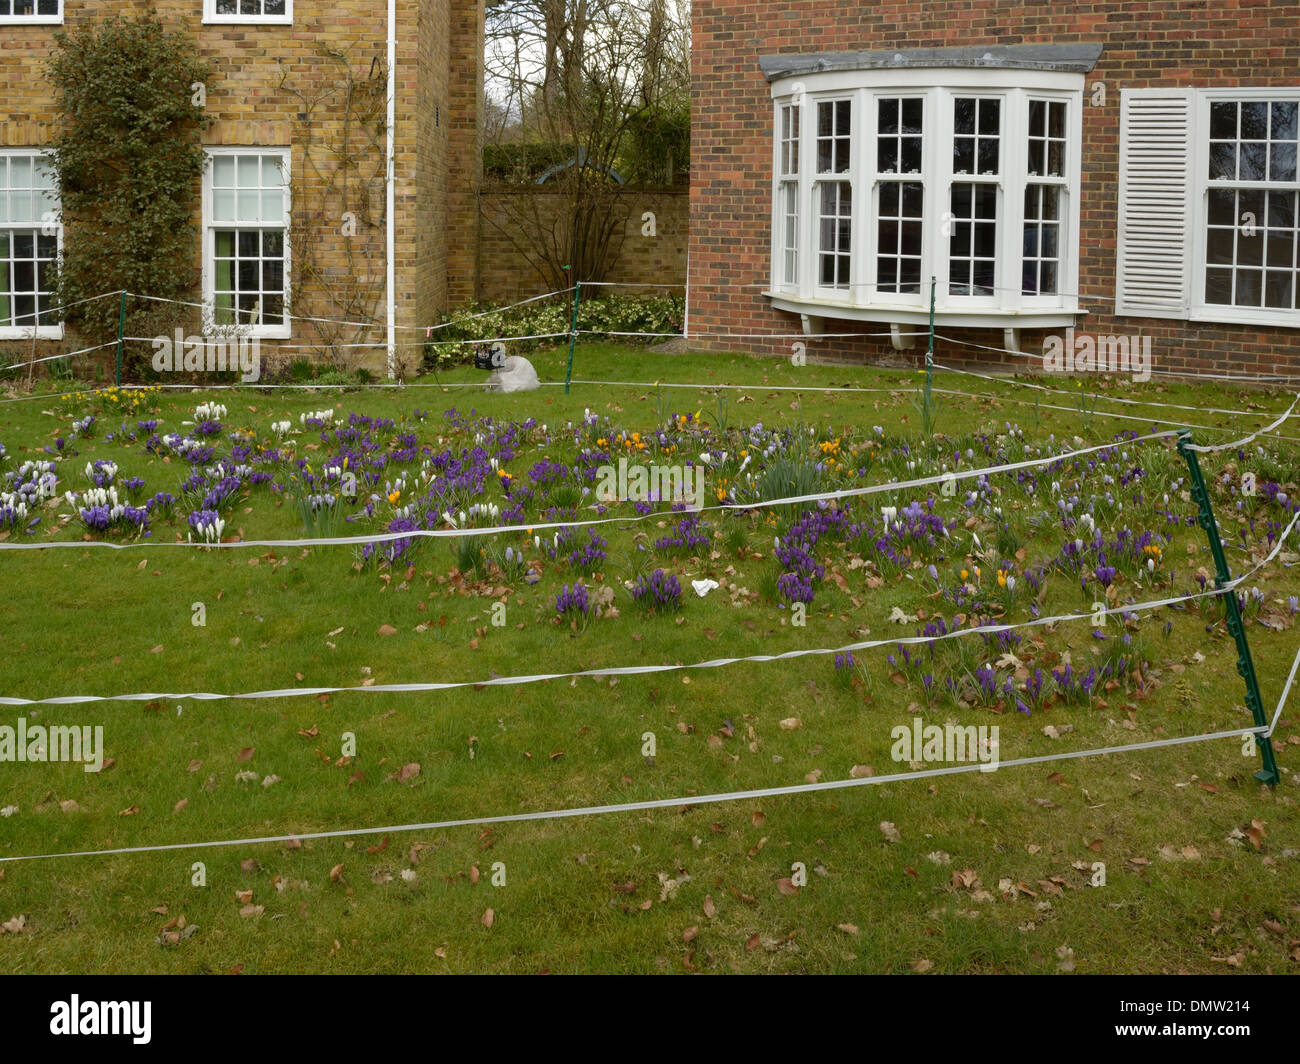 Crocuses With Electric Fence In A Suburban Front Garden Stock